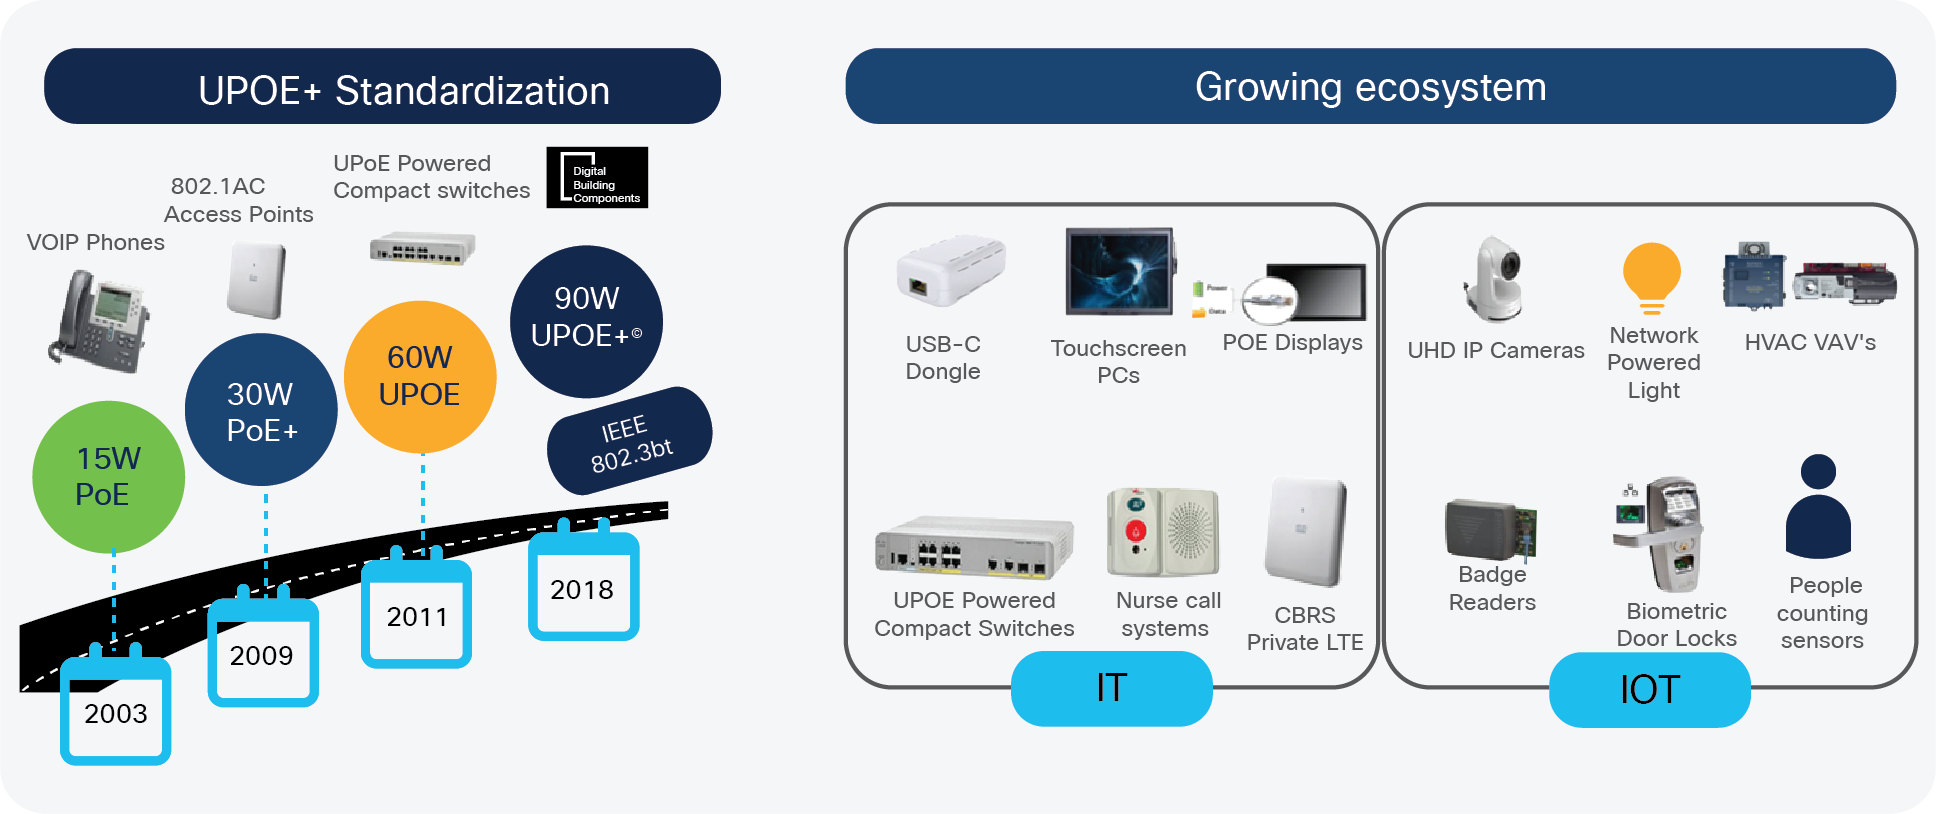 The evolution of the PoE and Cisco UPOE standards